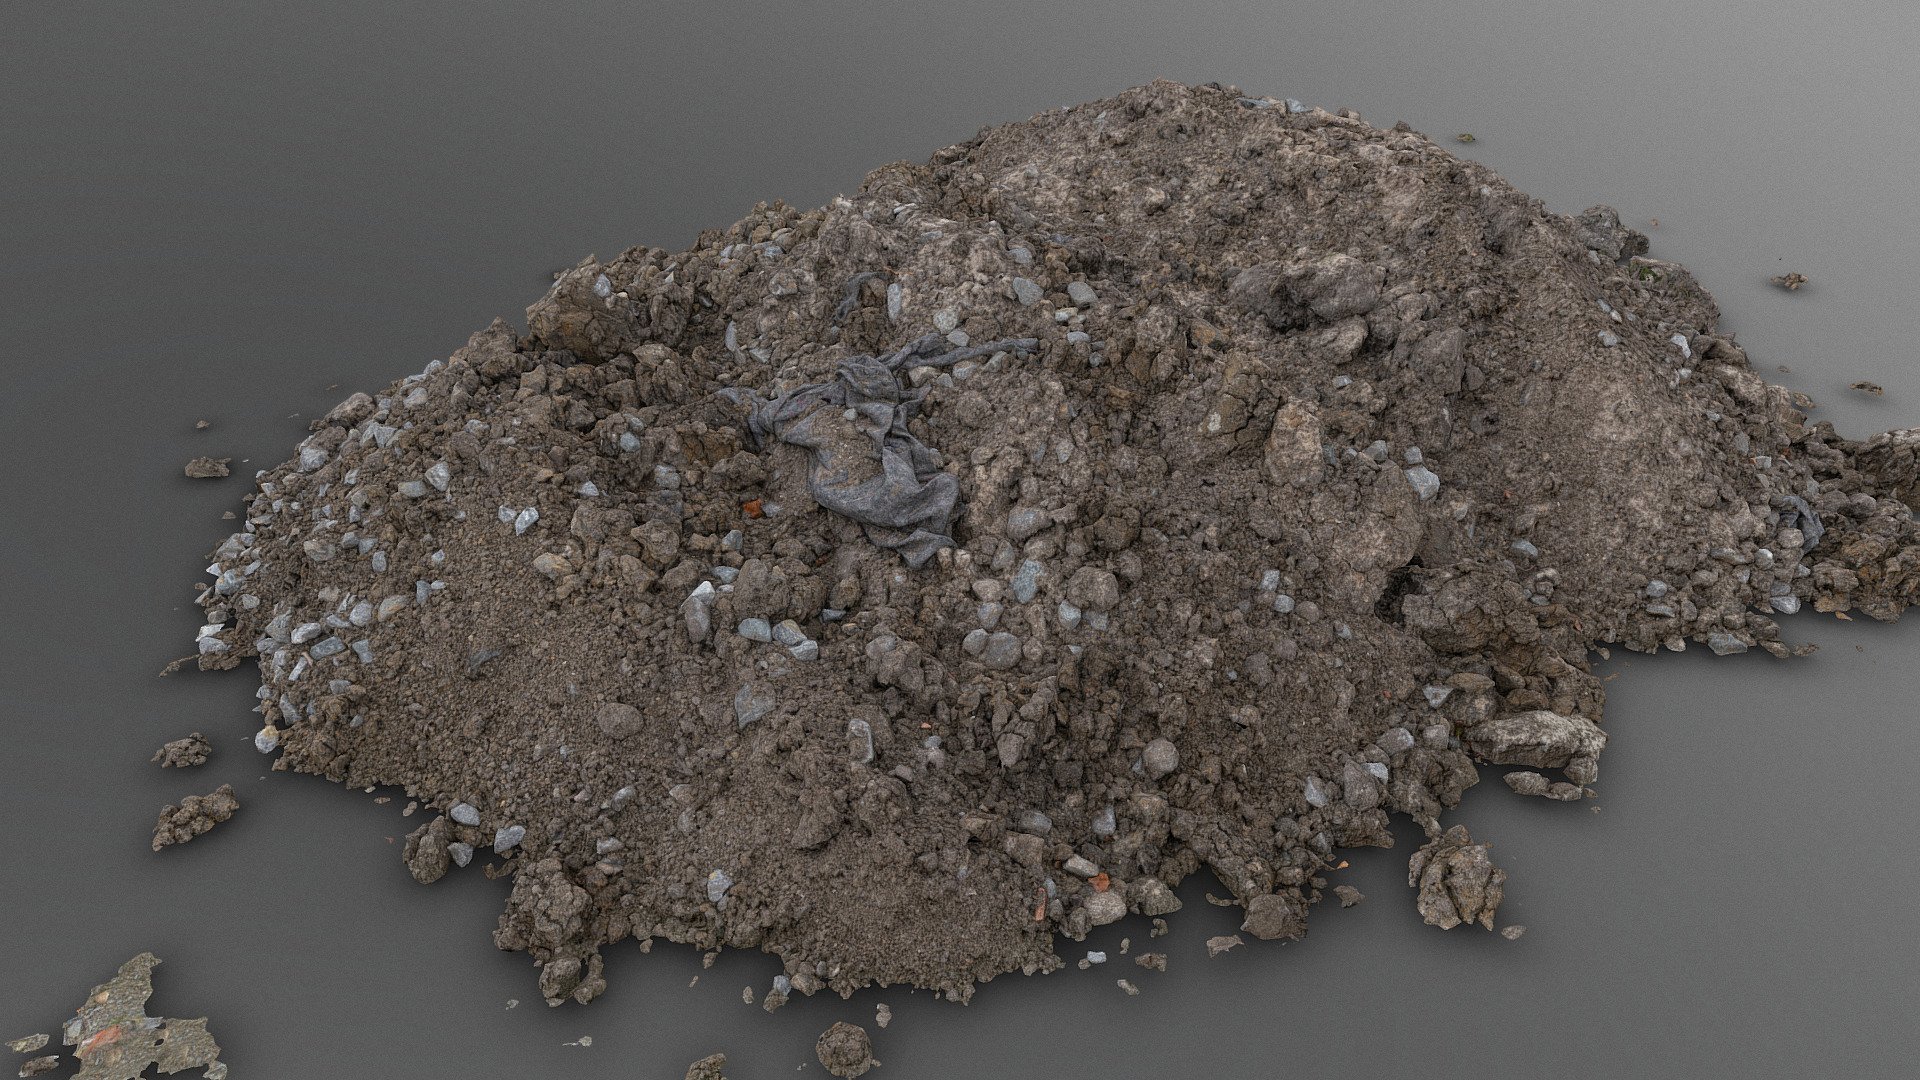 Pile of dark construction gardening soil mud land earth dirt heap pile mound, freshly dug soil heap of dirt with some rock stones and piece of insulation textile

Photogrammetry scan 180x24MP,  3x8K textures + HD normals and tiffs available as additional file download upon purchase - Stony soil pile - Buy Royalty Free 3D model by matousekfoto 3d model